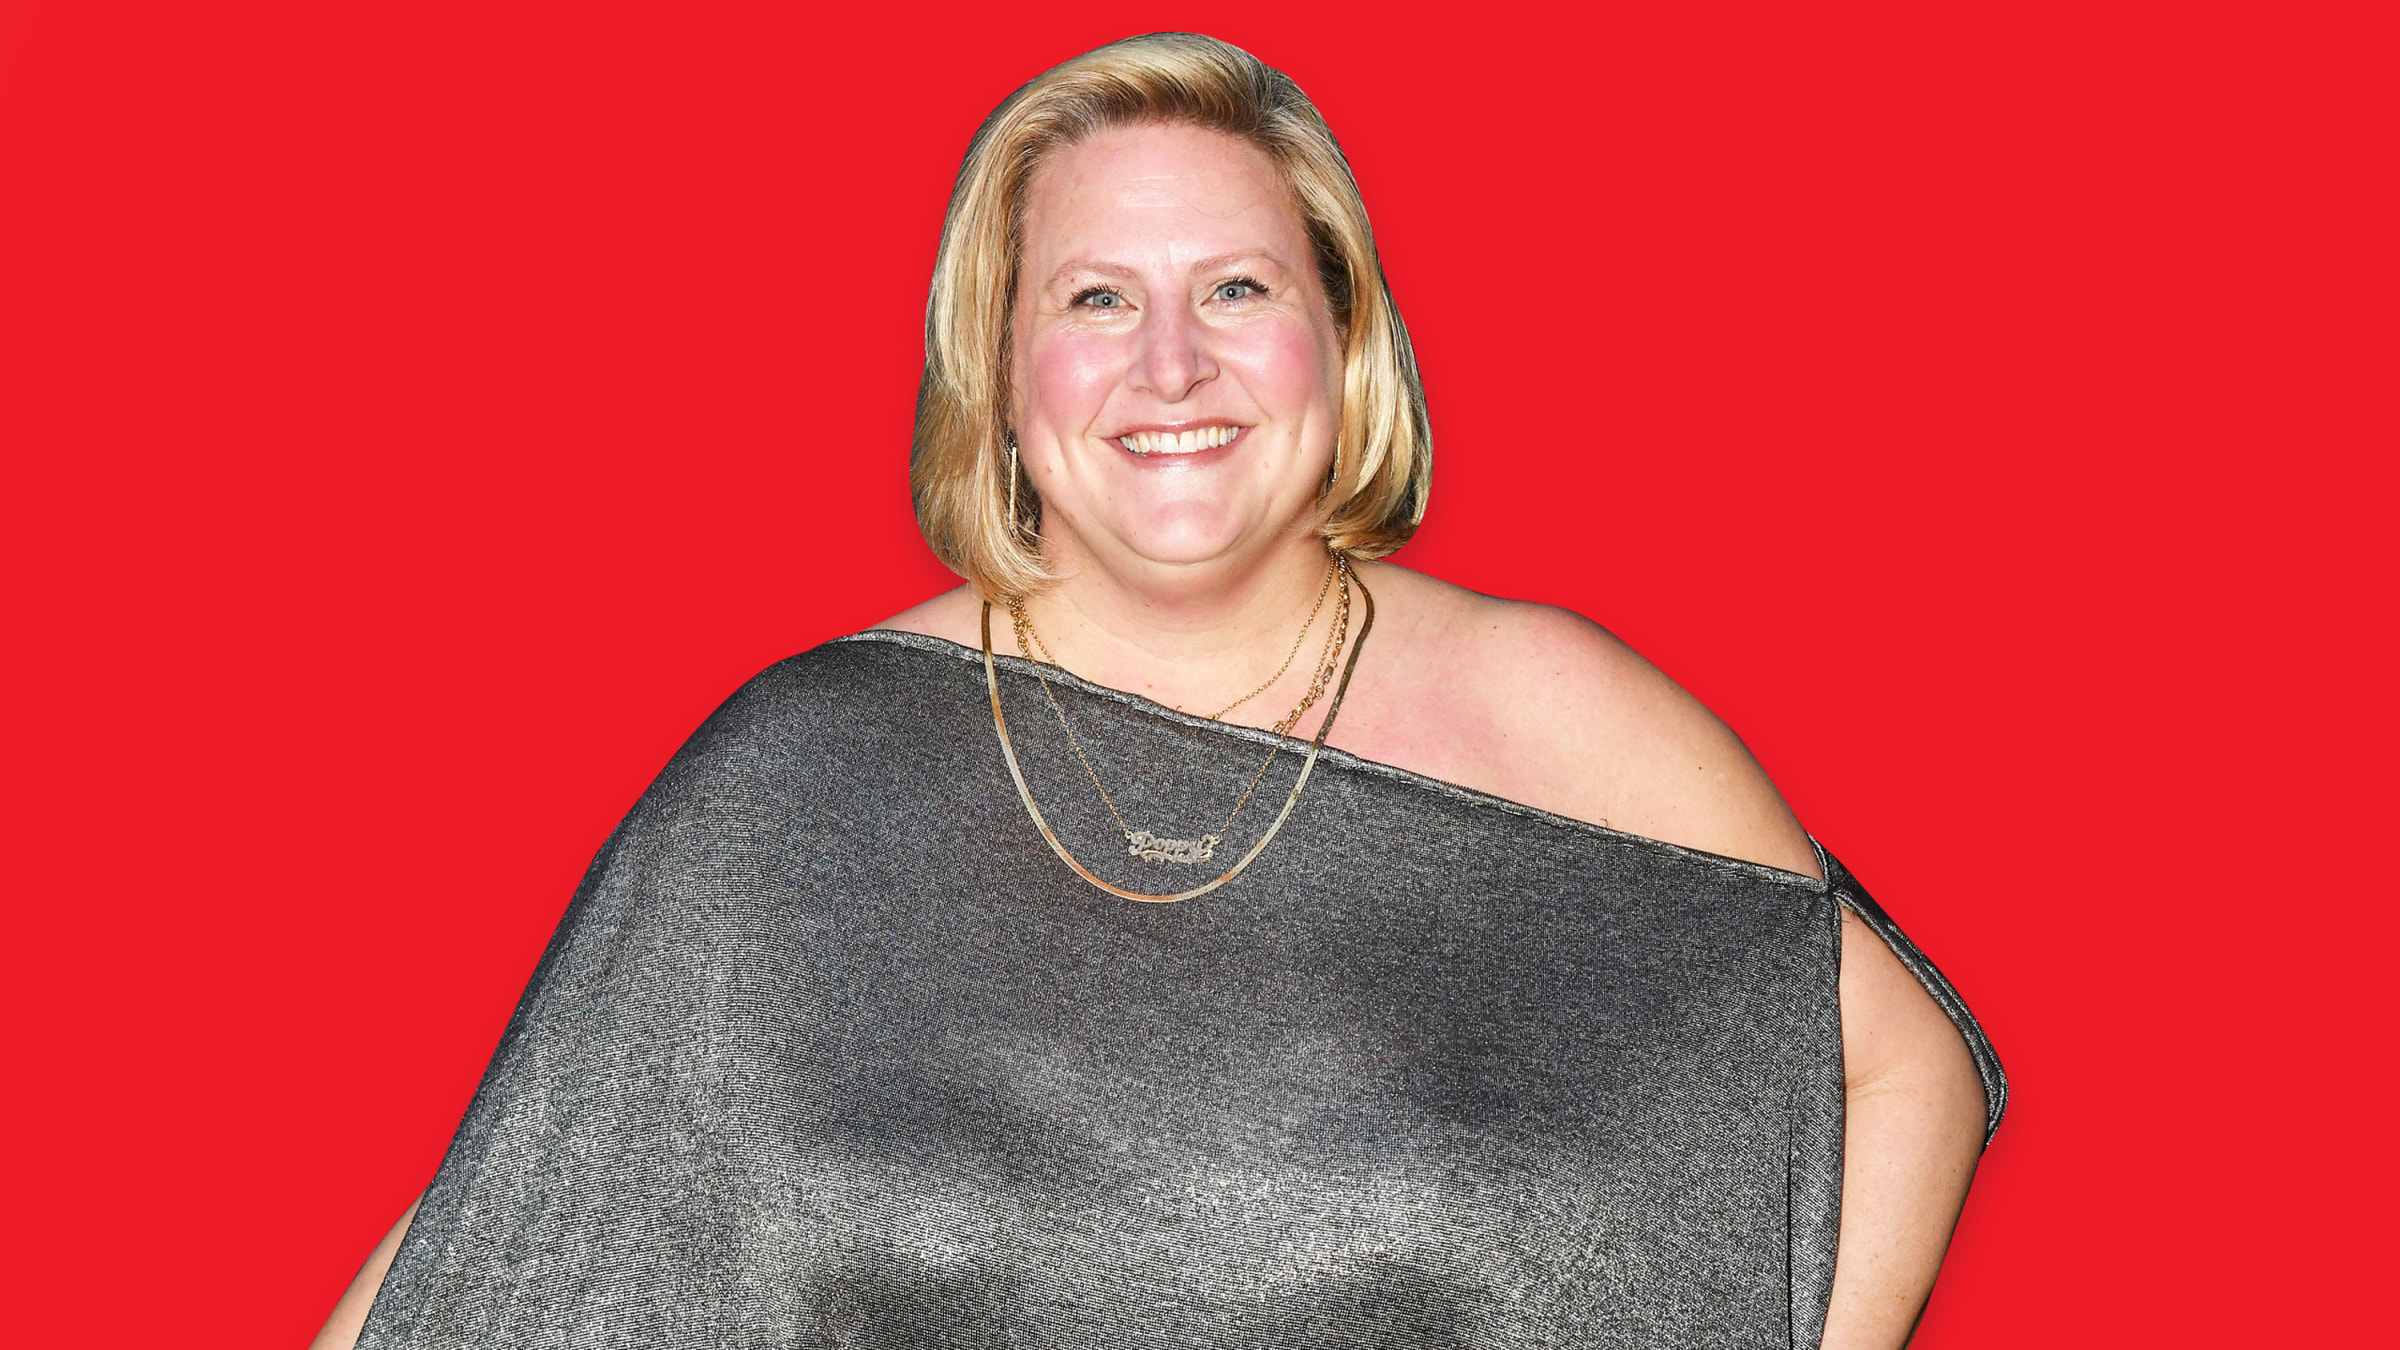 Bridget Everett Lays Herself Bare From The Heart To The Tits In